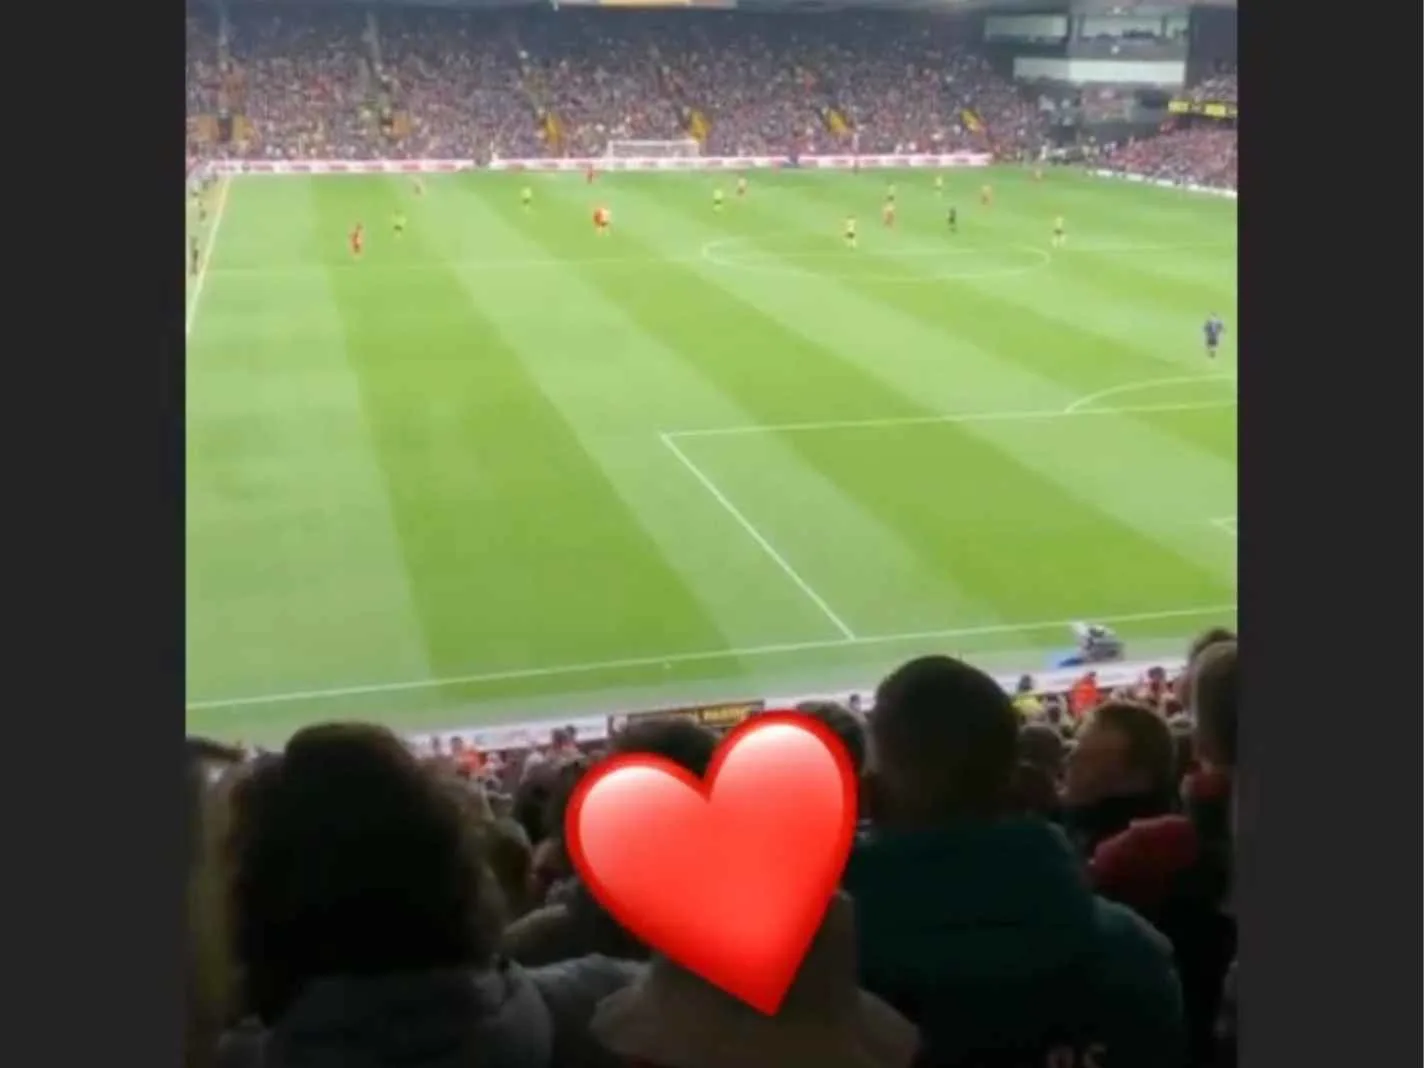 Arsenal fans air modest Ben White chant at Watford - And he loves it